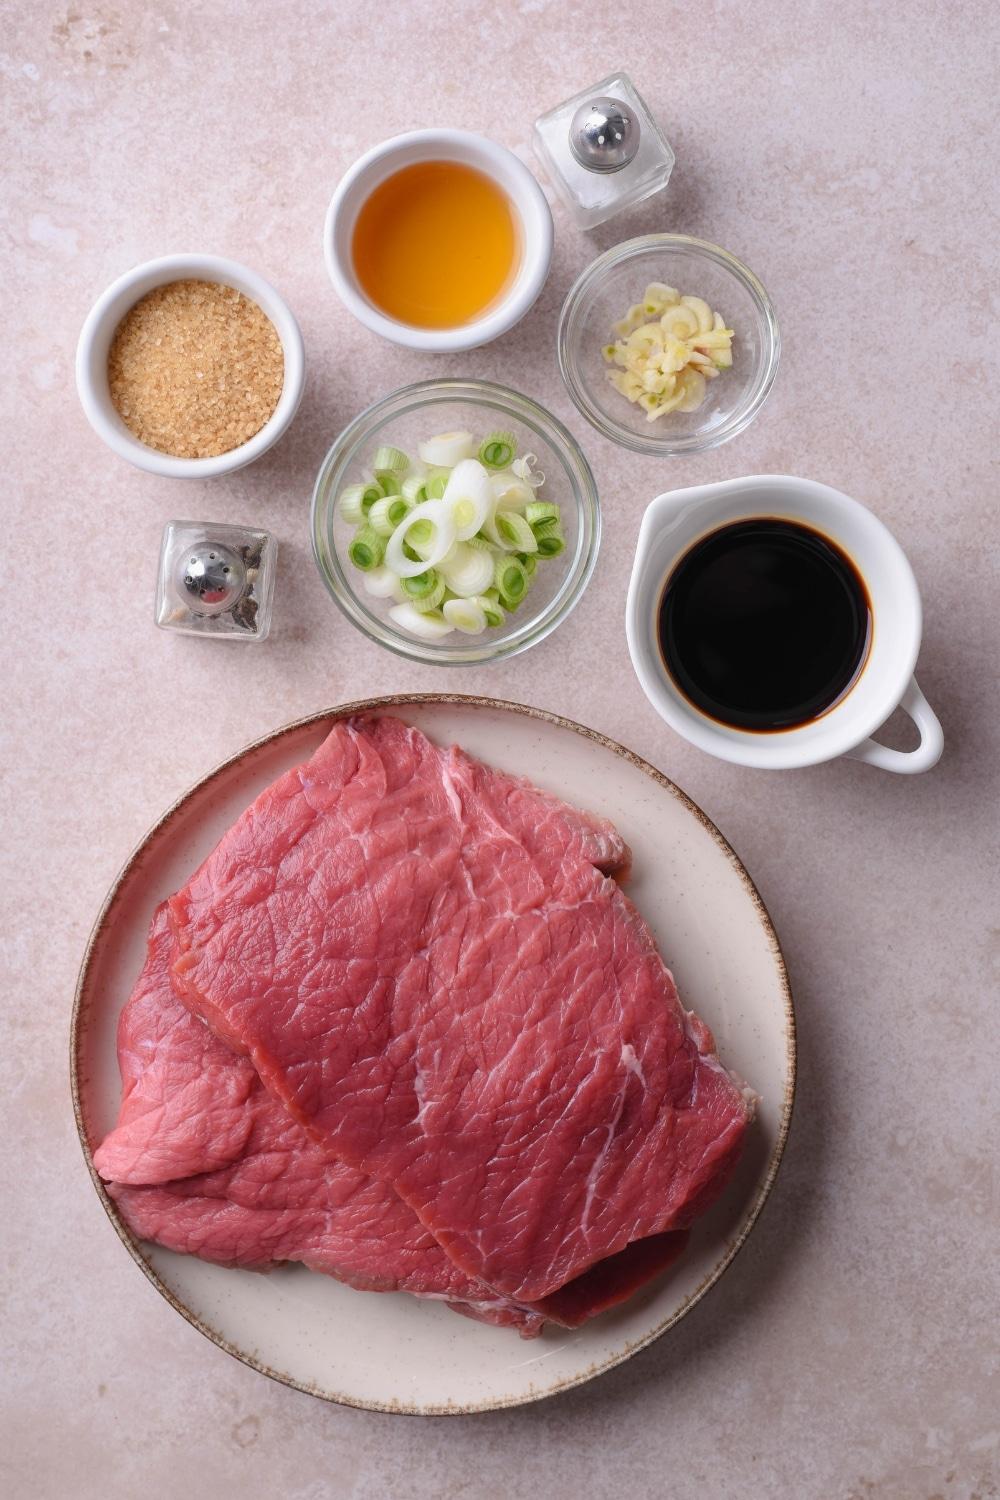 Raw sirloin tip steak on a plate, with small bowls of soy sauce, rice vinegar, brown sugar, sliced garlic cloves, sliced green onion, and salt and pepper shakers.